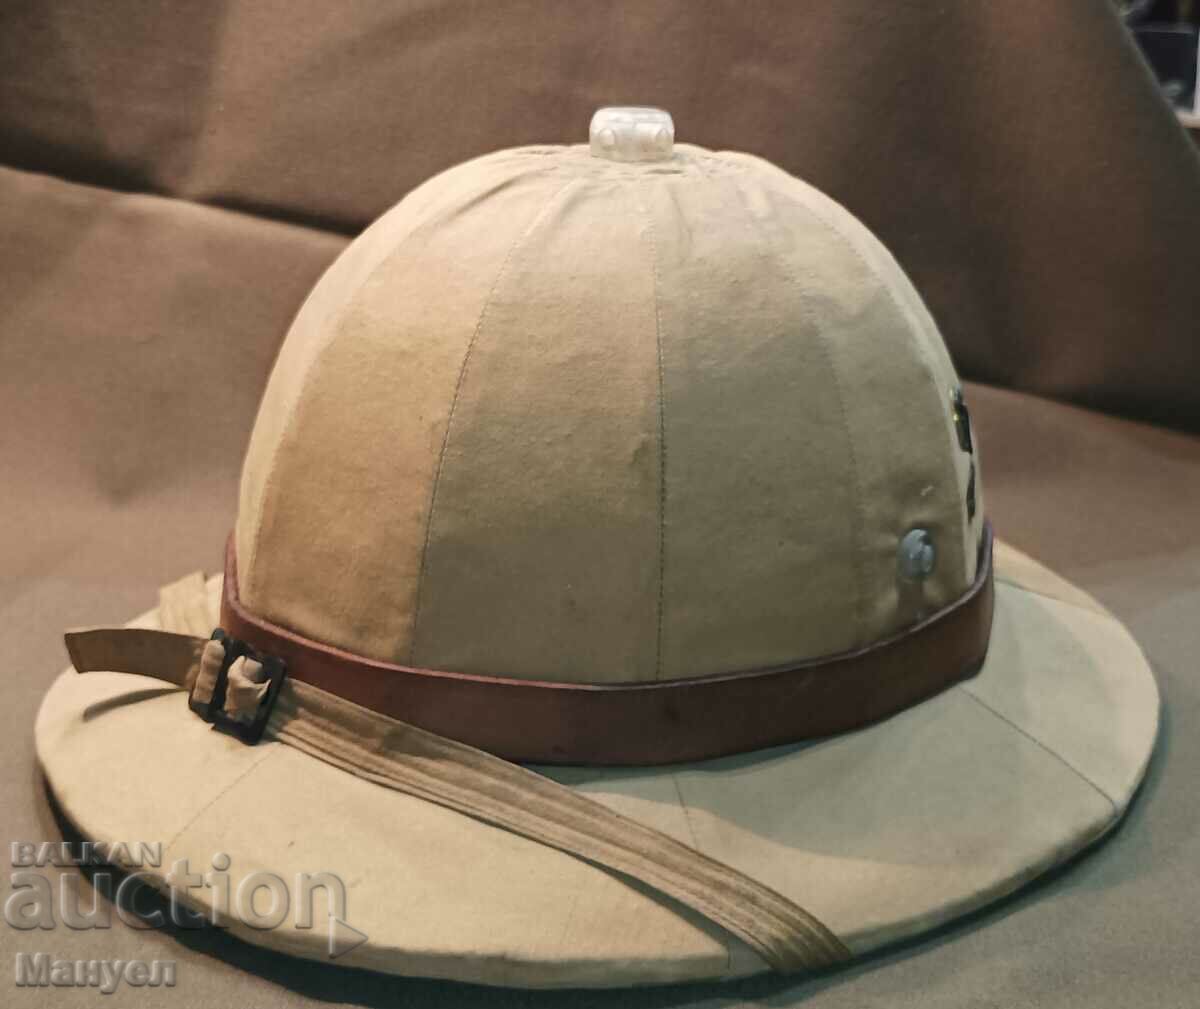 I am selling an old Africa helmet.